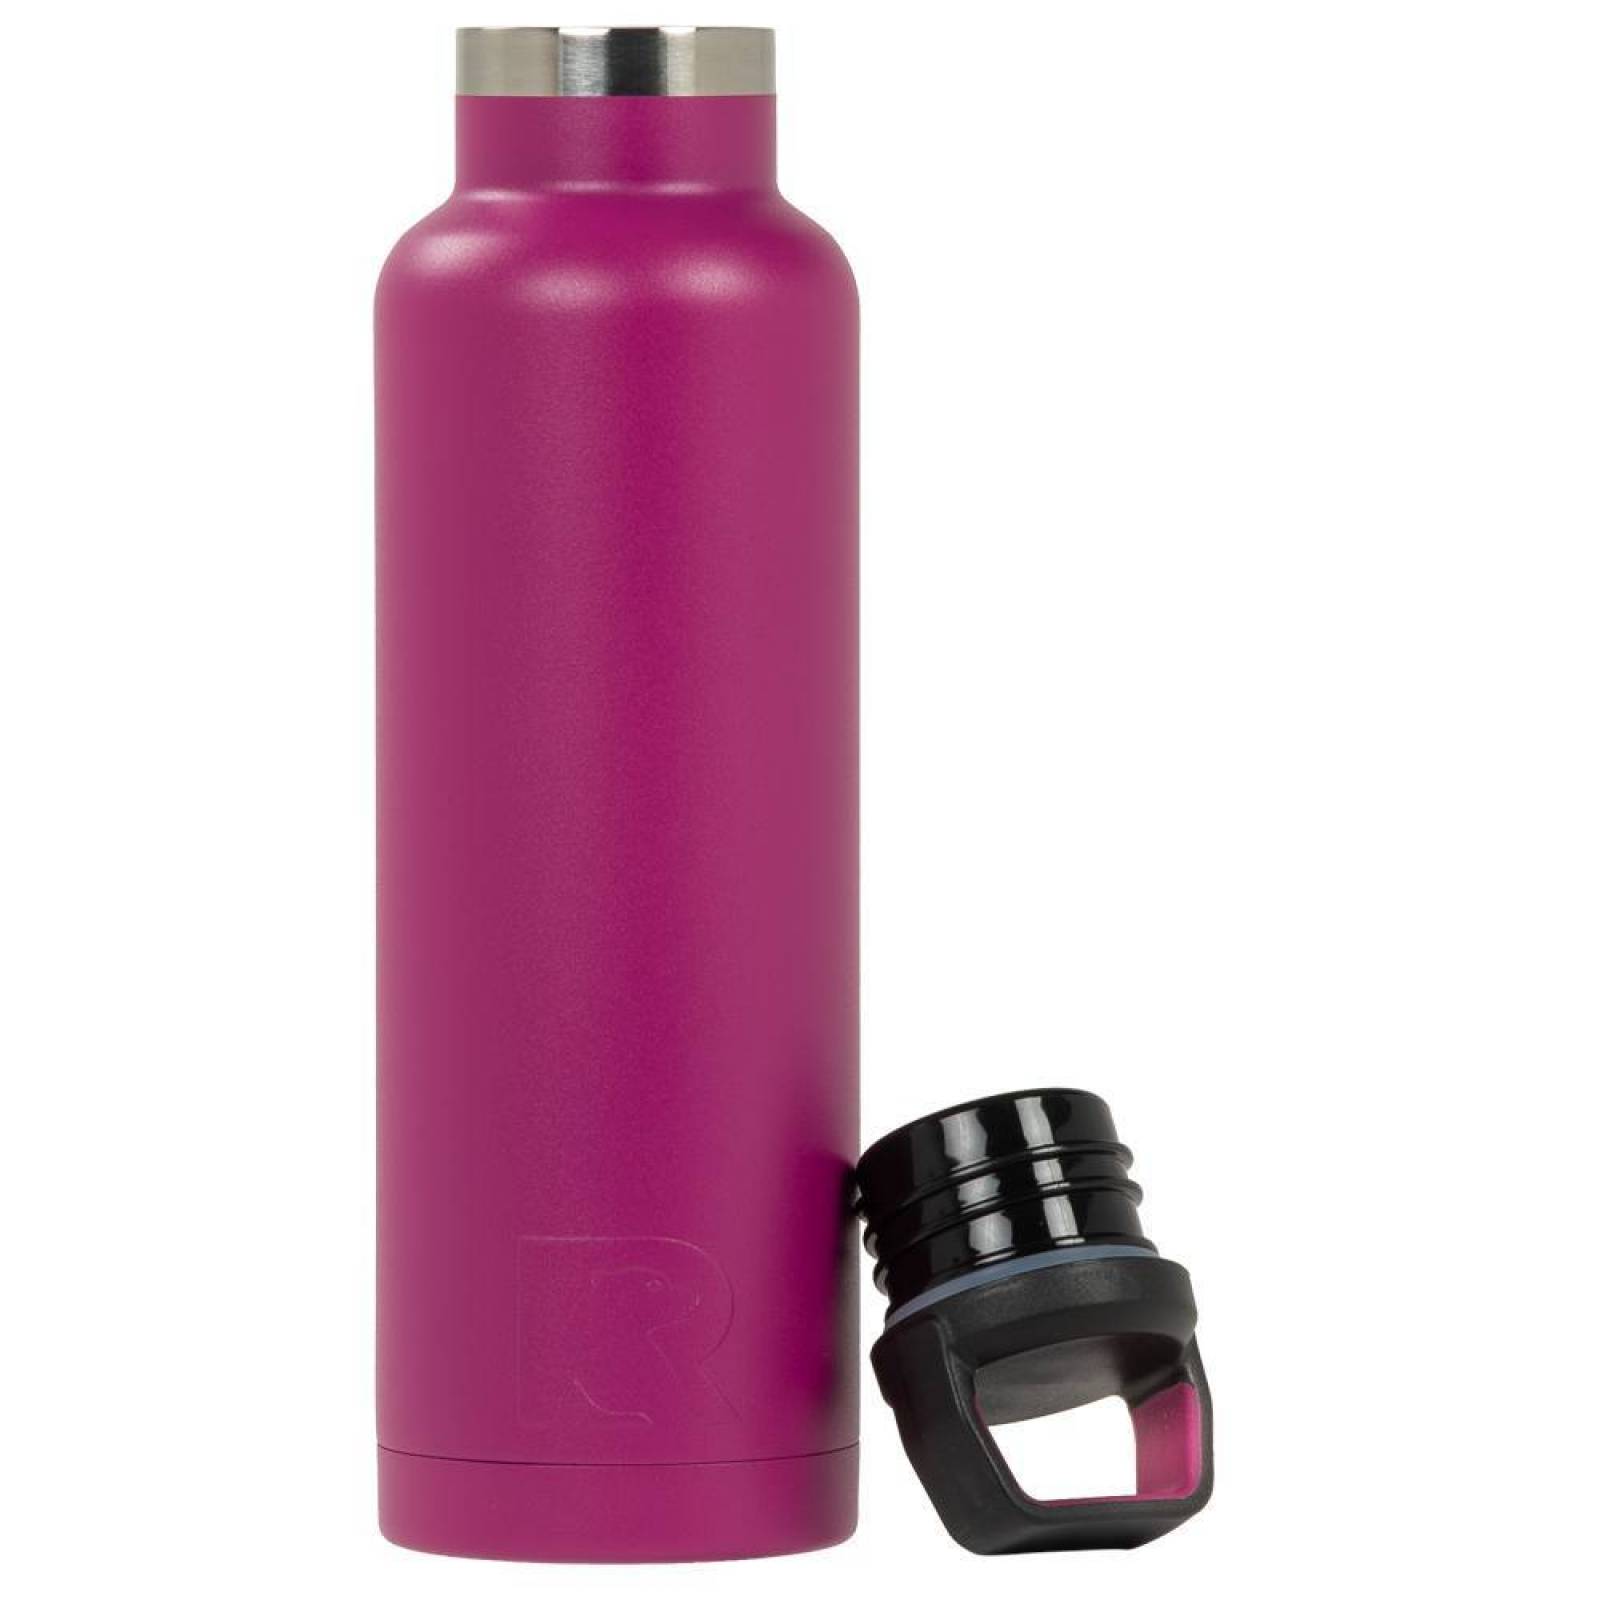 RTIC Water Bottle 20 oz. Very Berry Matte   1016